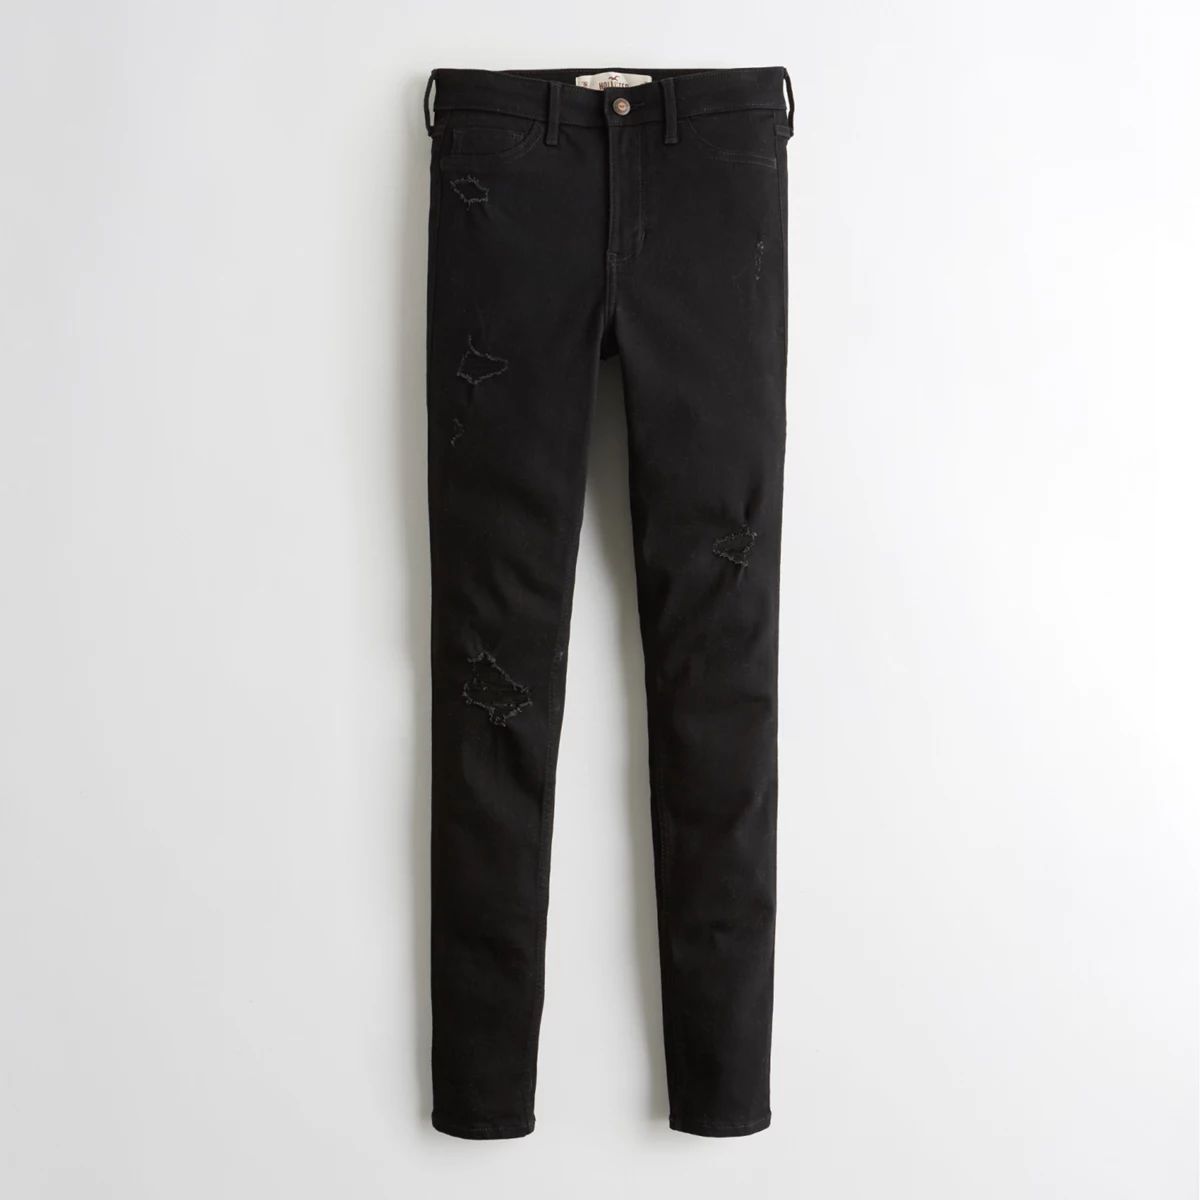 Girls Classic Stretch High-Rise Super Skinny Jeans from Hollister | Hollister US